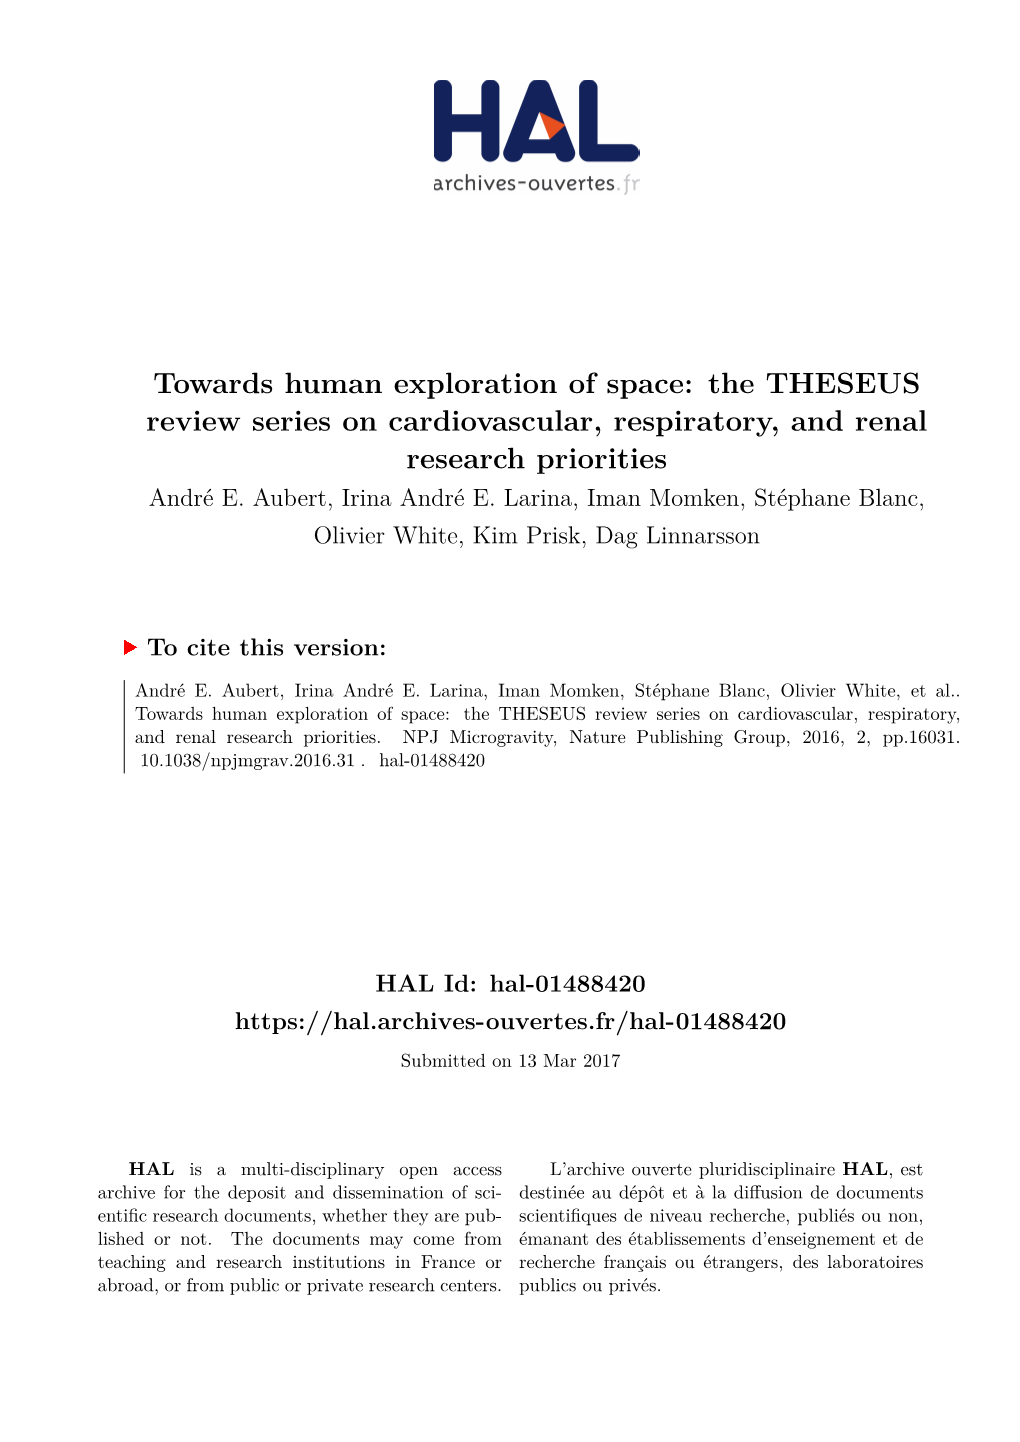 Towards Human Exploration of Space: the THESEUS Review Series on Cardiovascular, Respiratory, and Renal Research Priorities André E